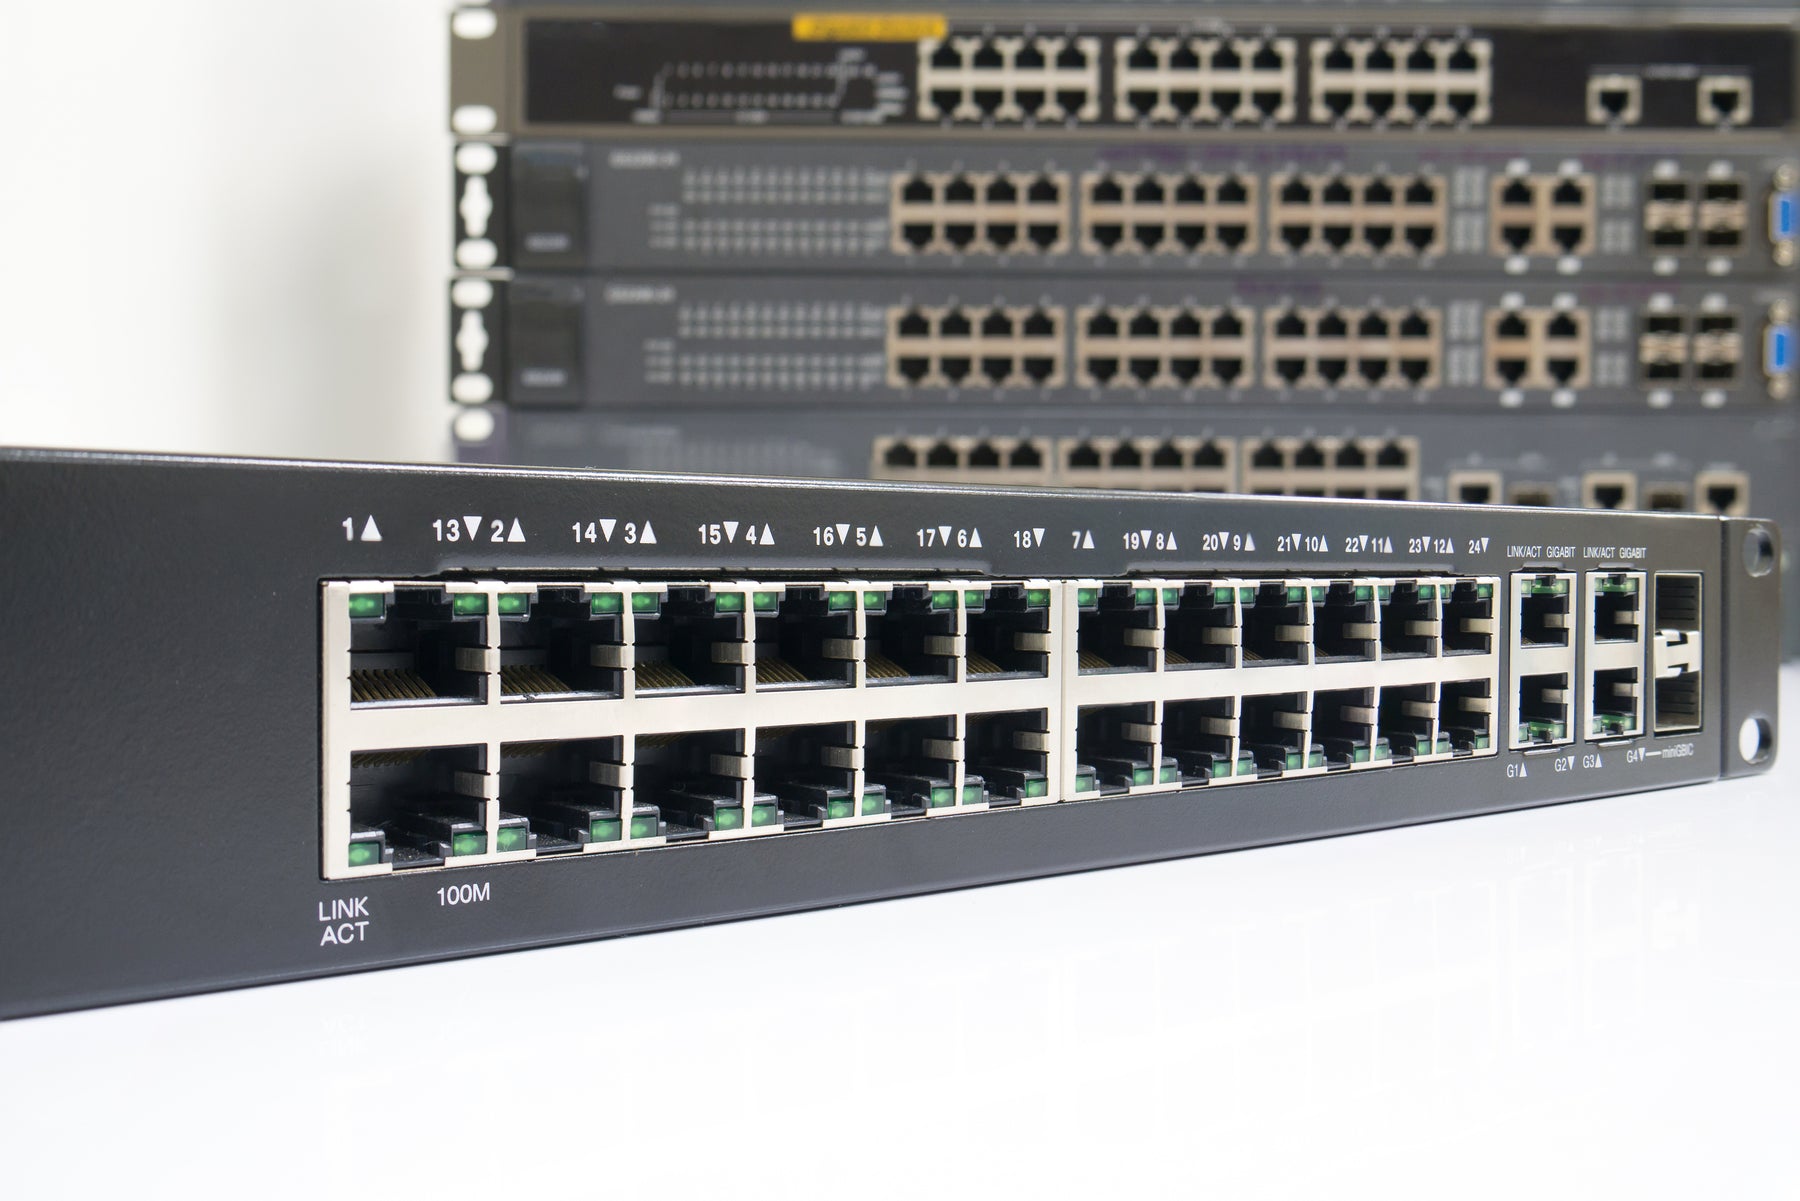 Cisco Switches vs Arista Switches: Pros and Cons 2023